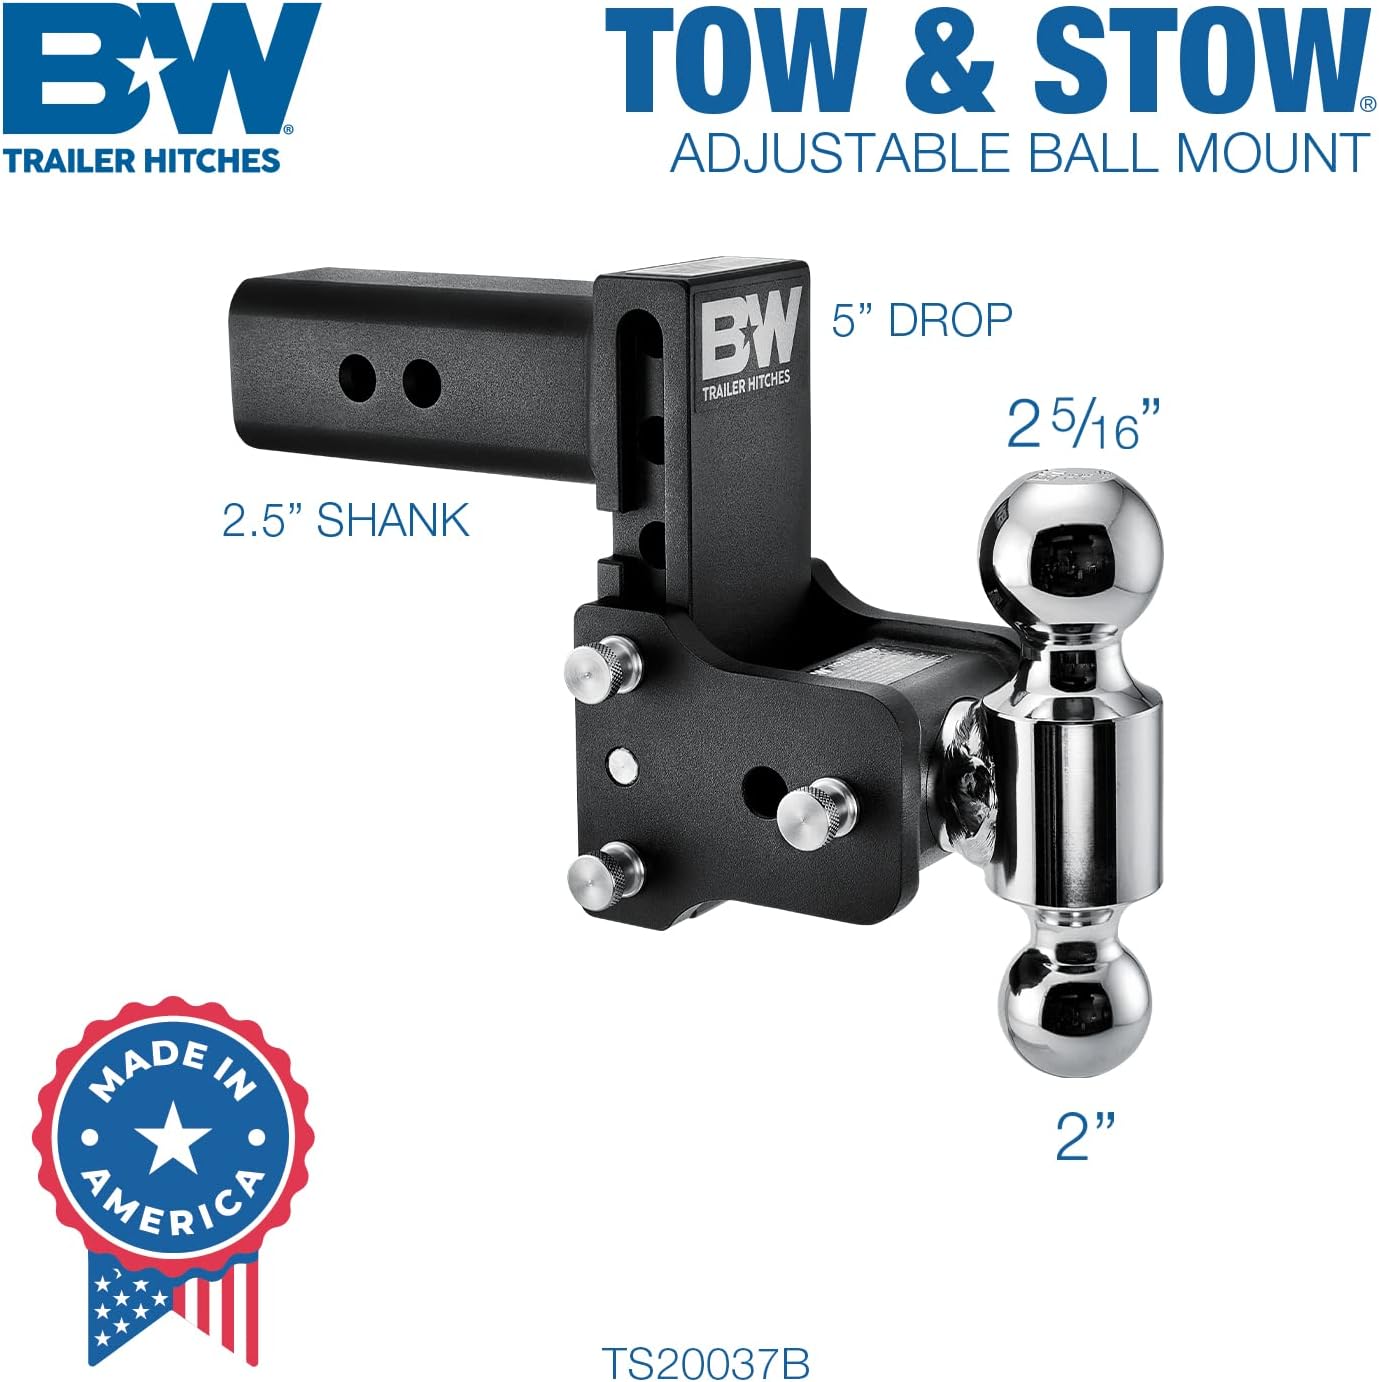 B&W Tow & Stow Adjustable Trailer Hitch Ball Mount #TS20037B